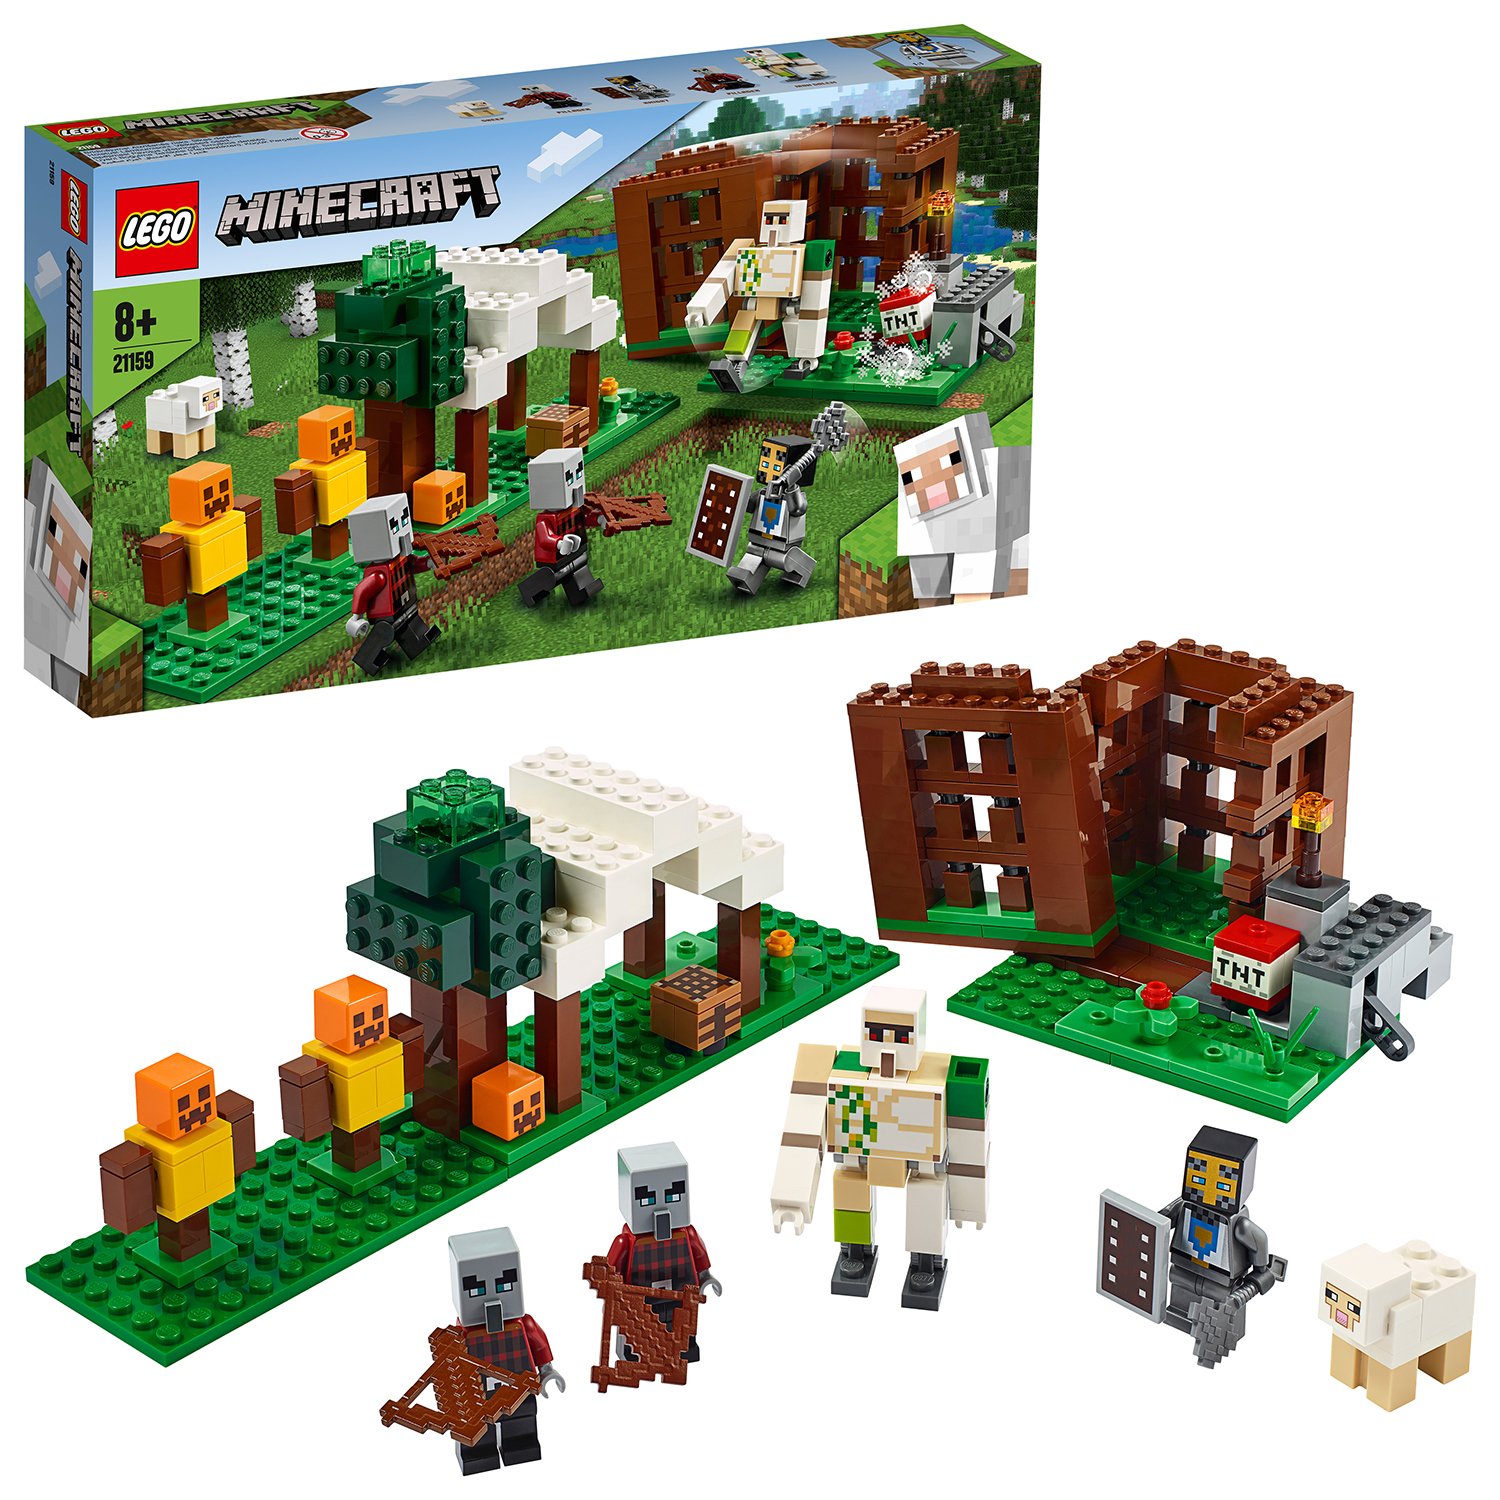 LEGO Minecraft The Pillager Outpost Building Set 21159